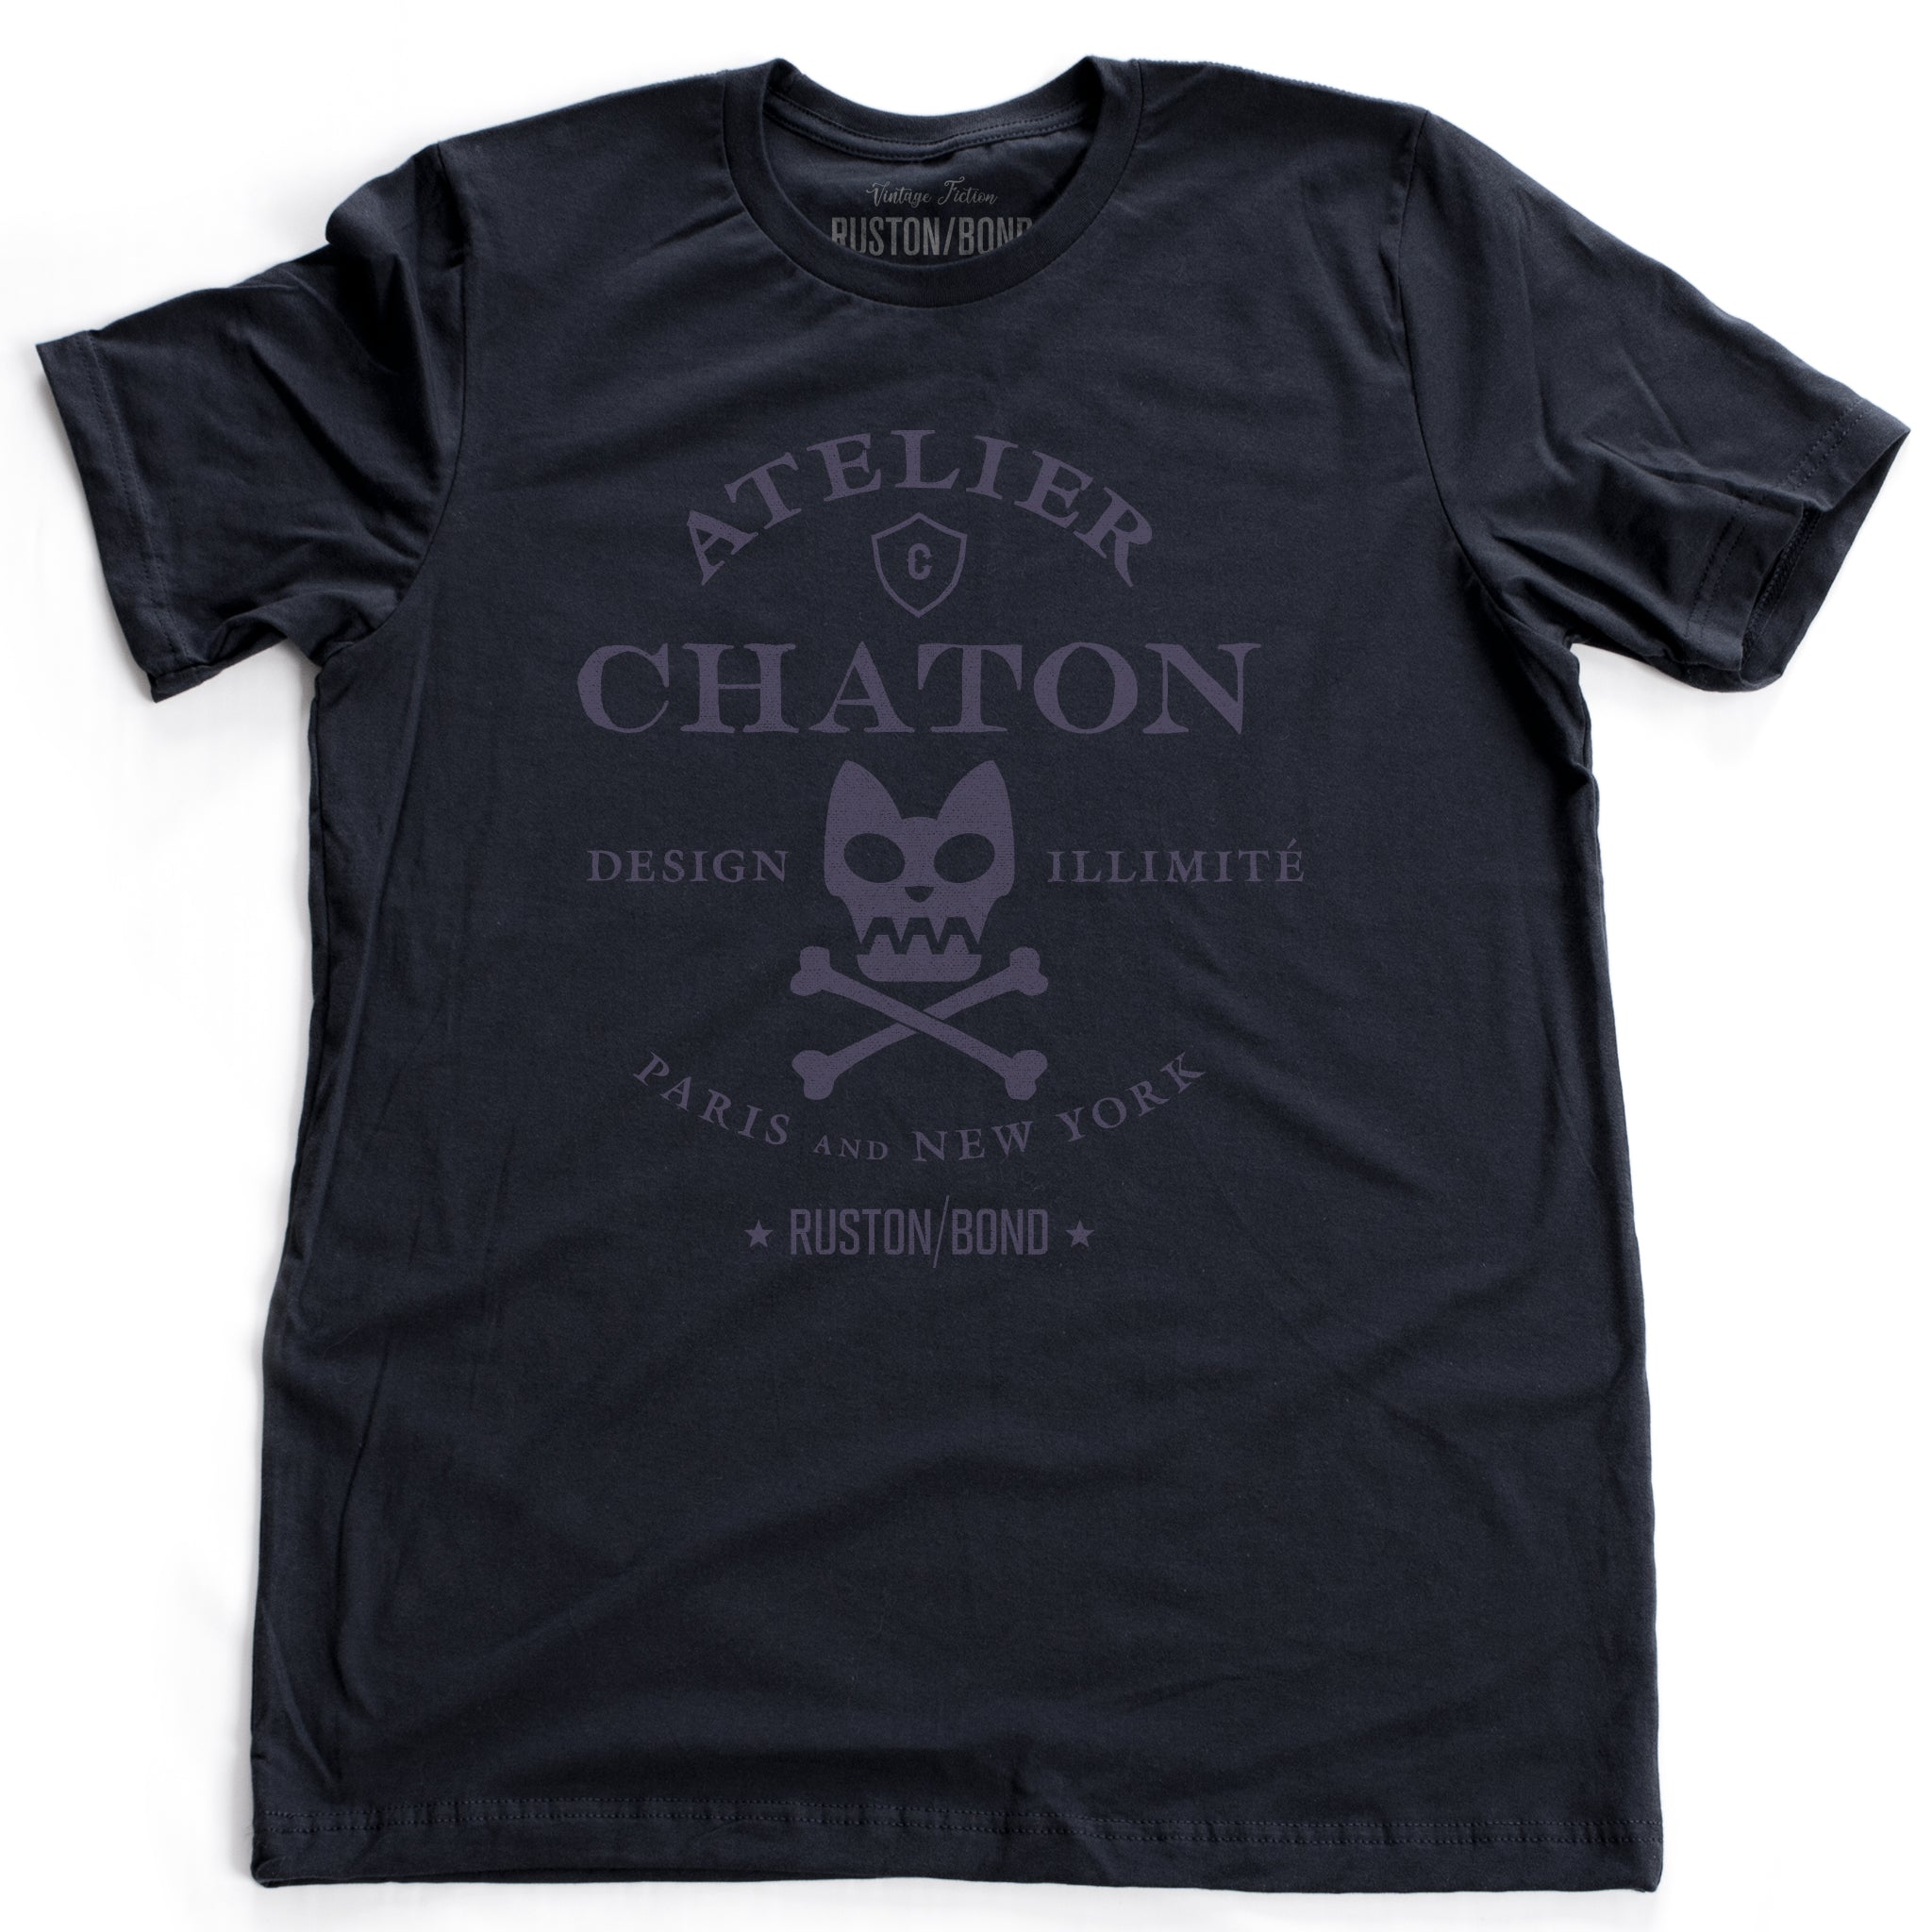 Navy Blue retro, vintage-inspired fashion t-shirt for a fictional graphic design studio in Paris and New York, featuring a graphic of a cat skull and cross bones, from brand Ruston/Bond. From wolfsaint.net